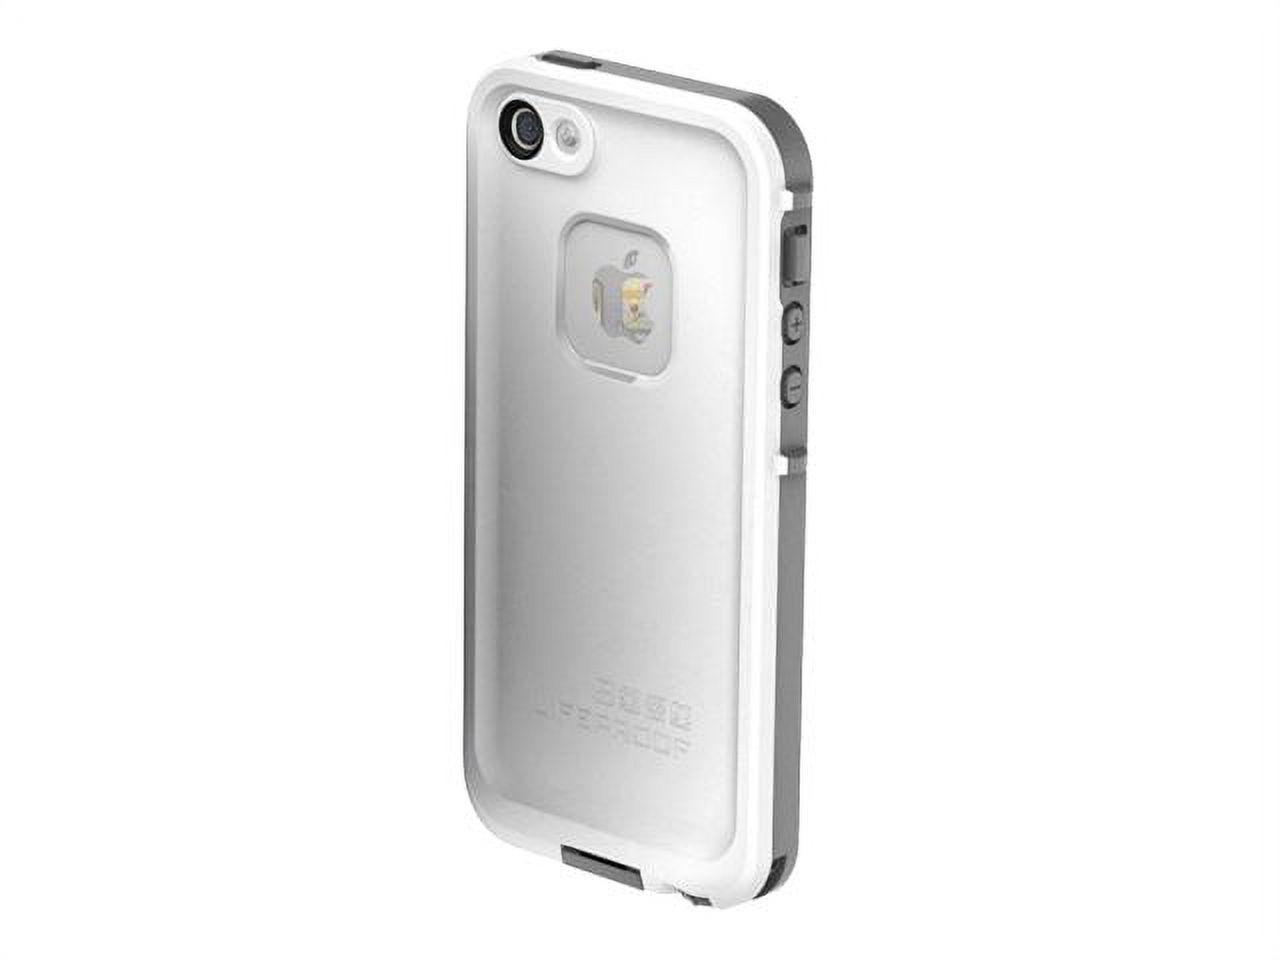 Treefrog LifeProof Case for iPhone 5/5s, White/Gray - image 1 of 3